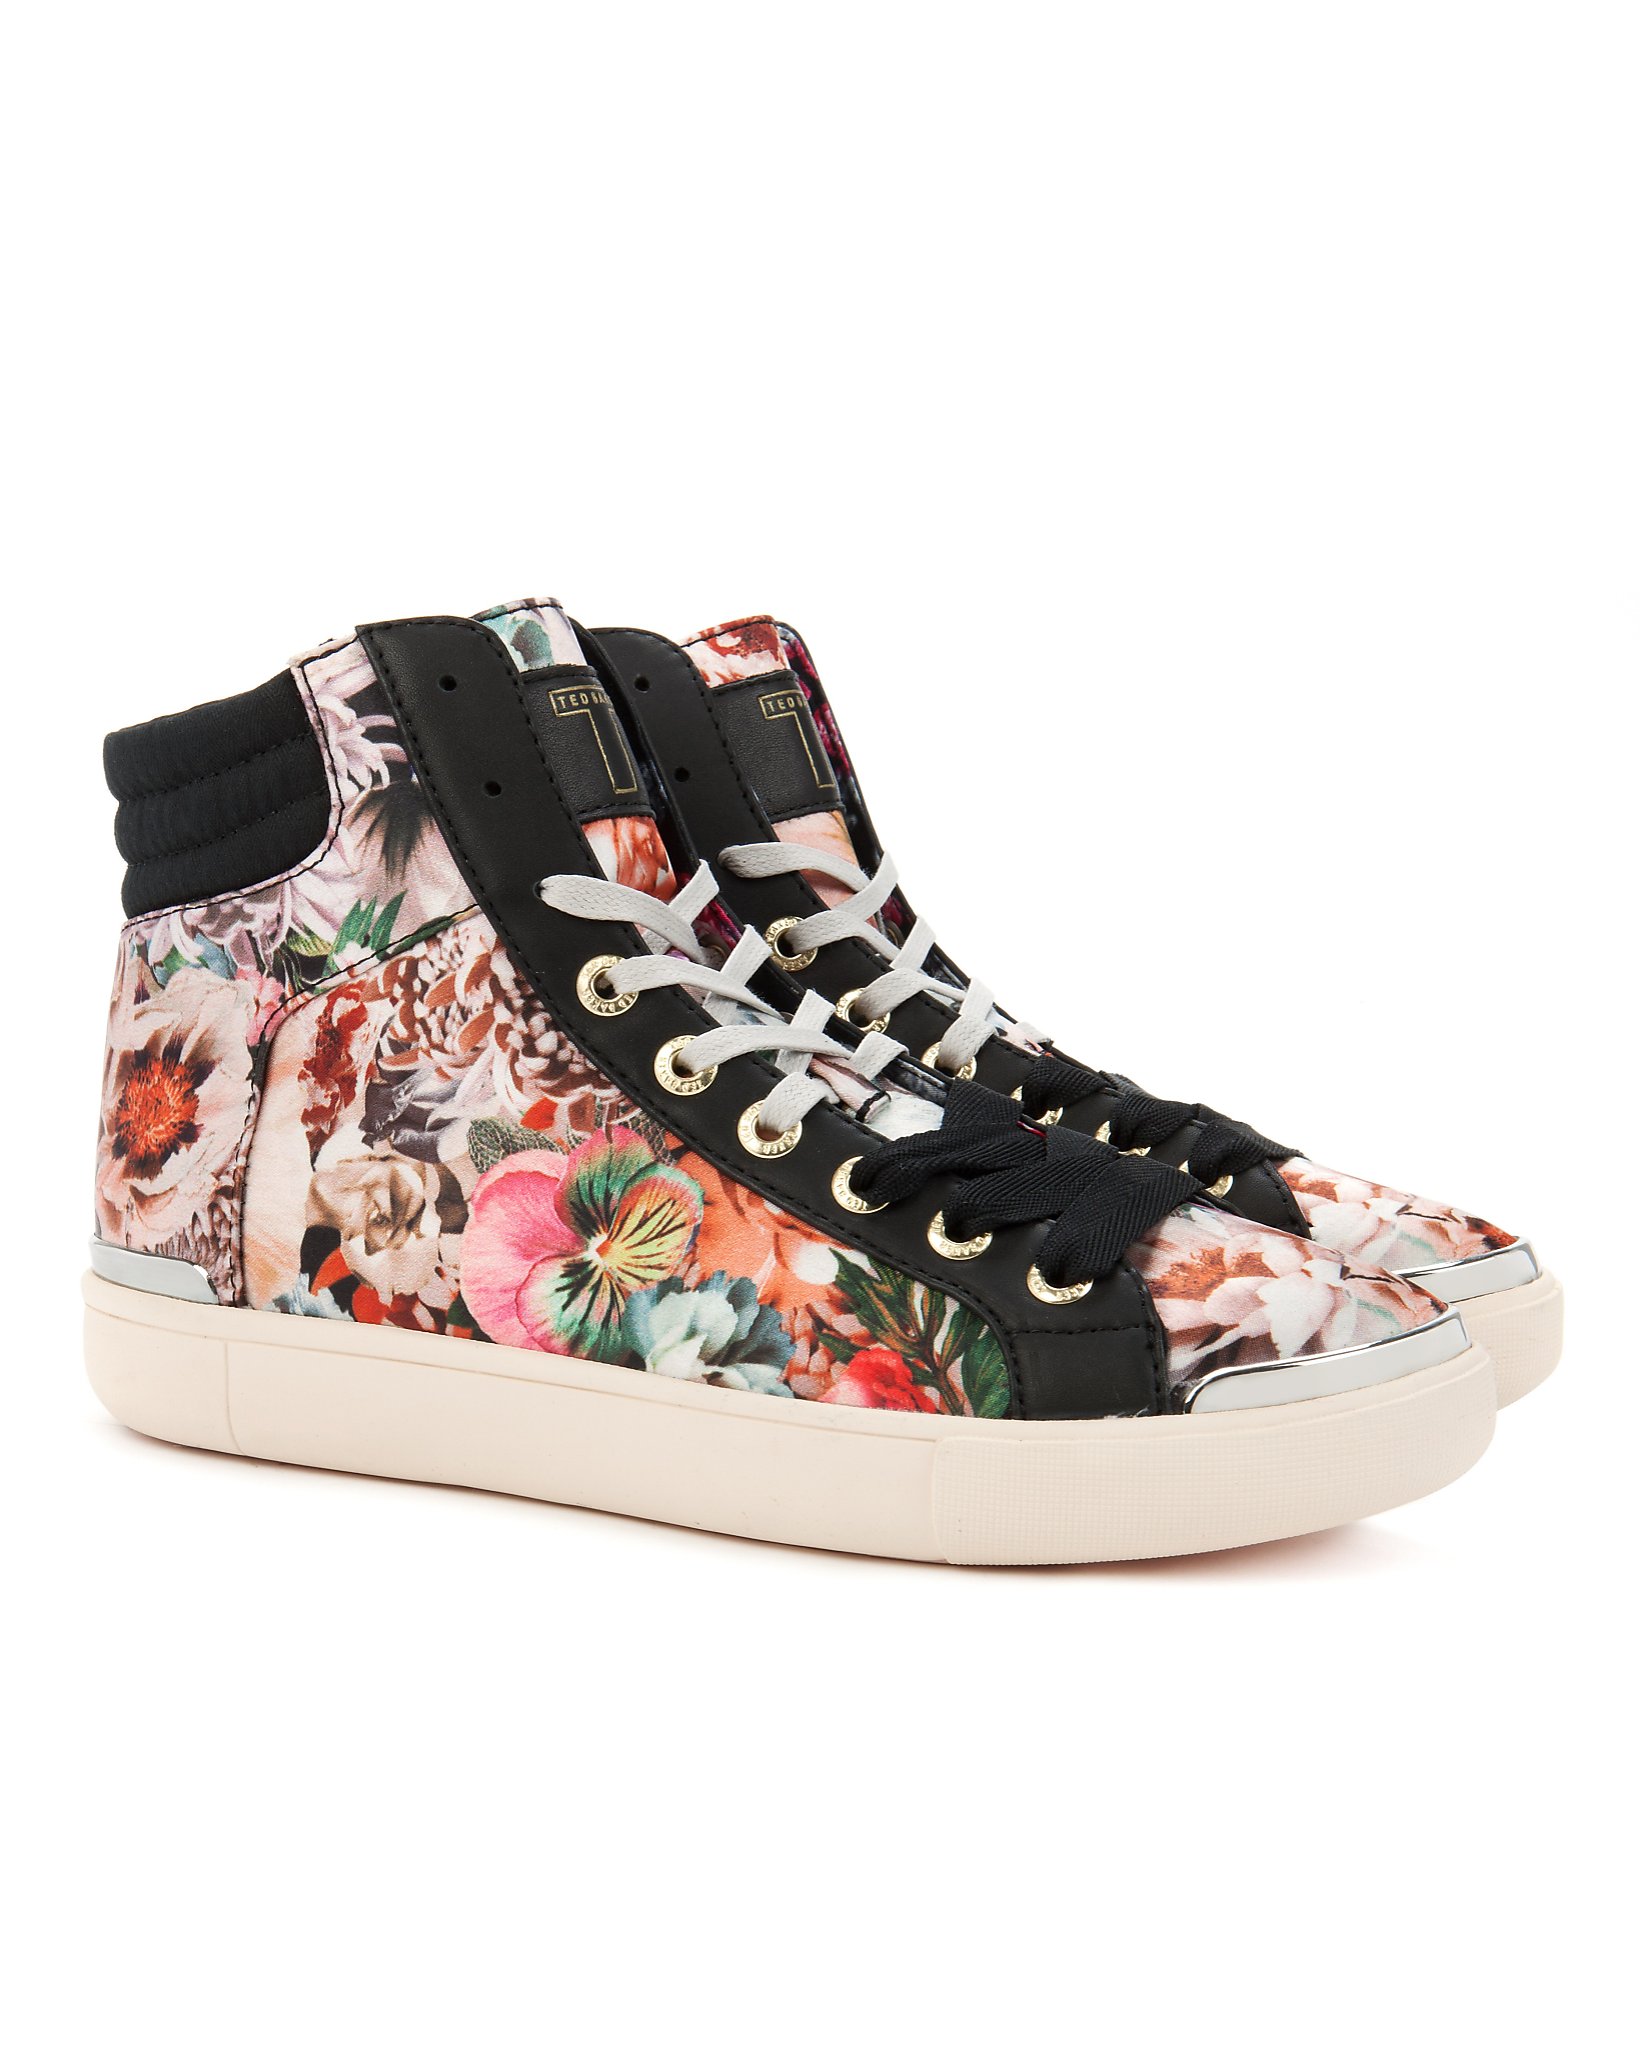 Put a spring trend in your step with chic sneaks